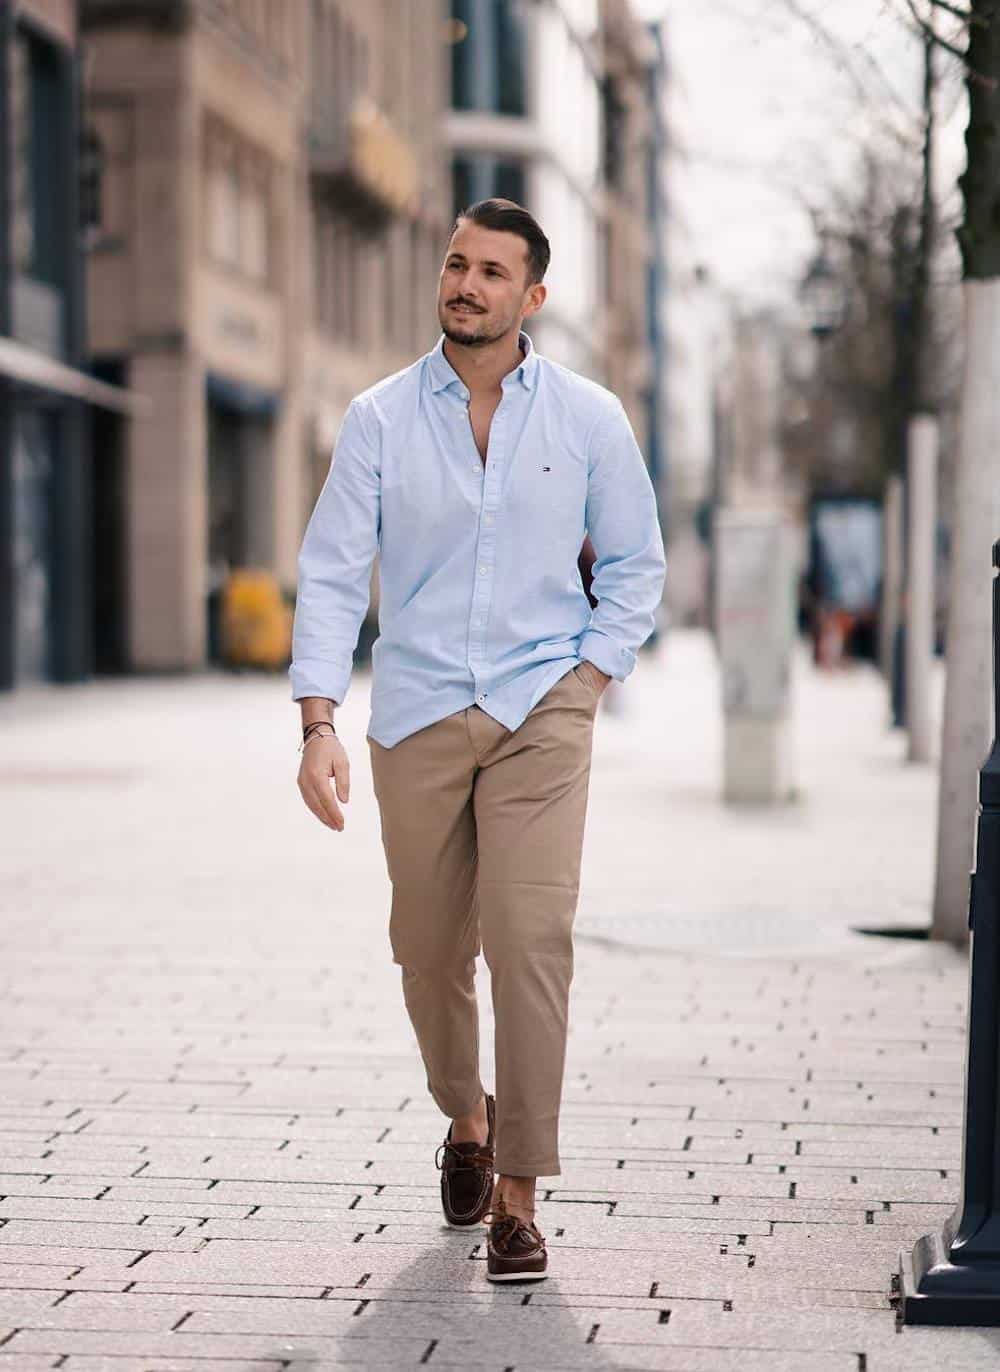 image of a man wearing brown shoes, khaki pants, and a light blue button up oxford shirt, as he walks down the sidewalk